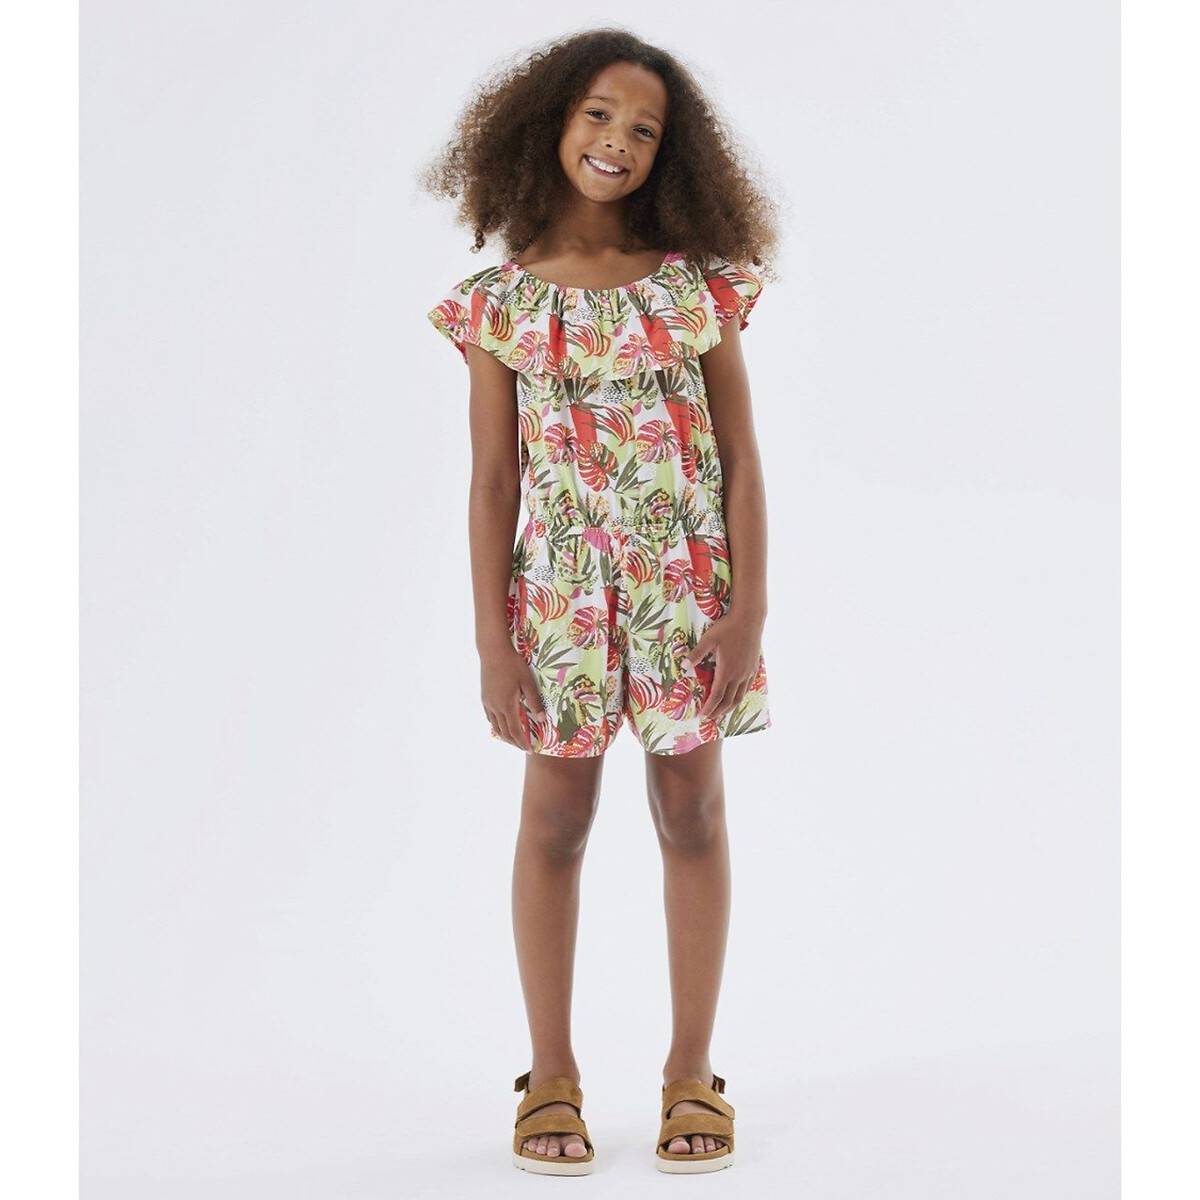 Image of Recycled Floral Print Playsuit with Ruffle